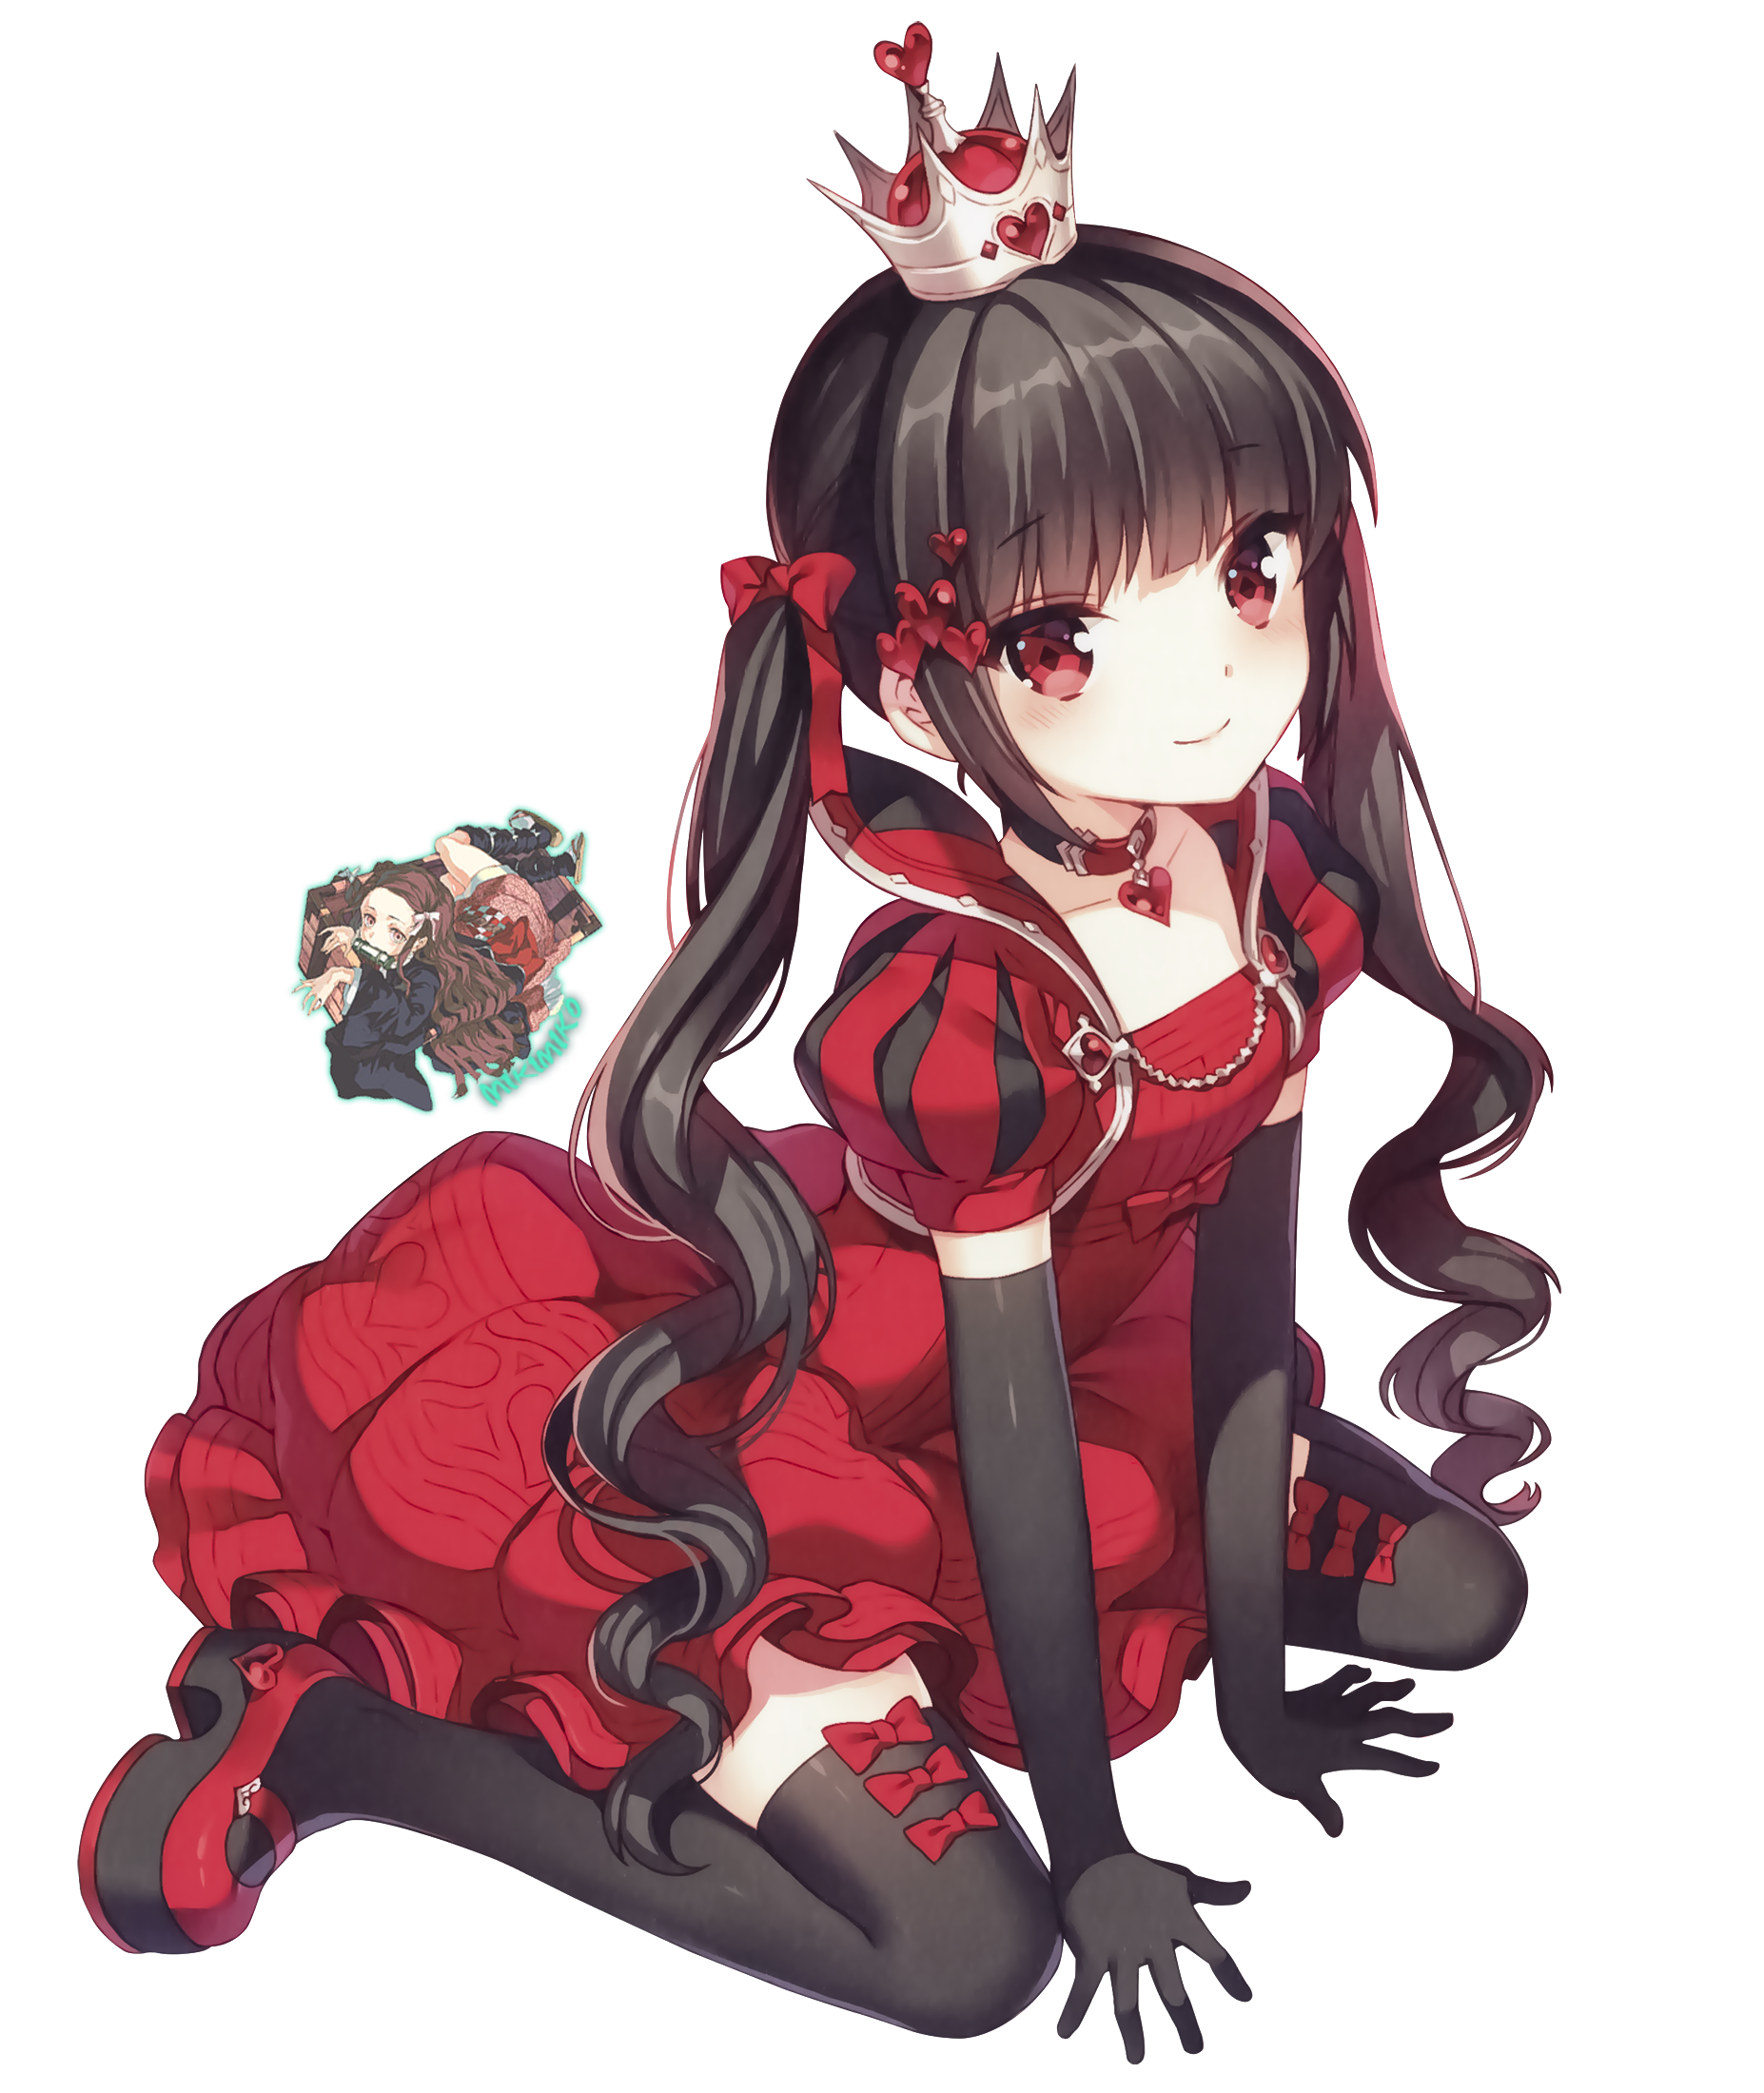 Anime Girl Png Transparent Image Download Size 1854x2200px